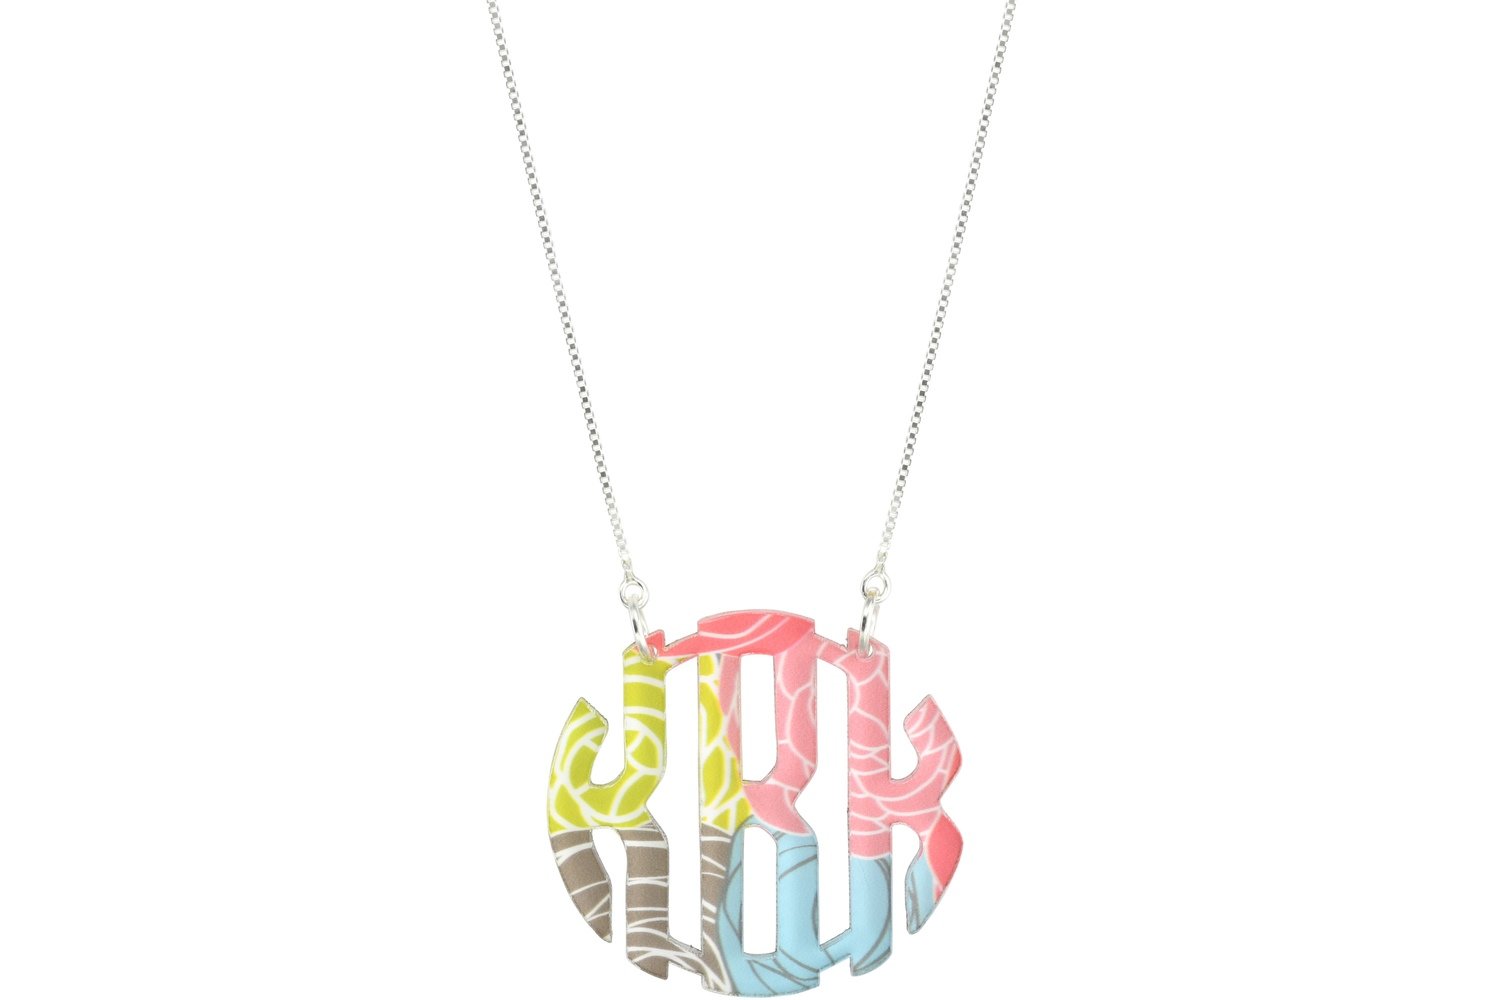 Clean Block Monogram with Duo Necklace